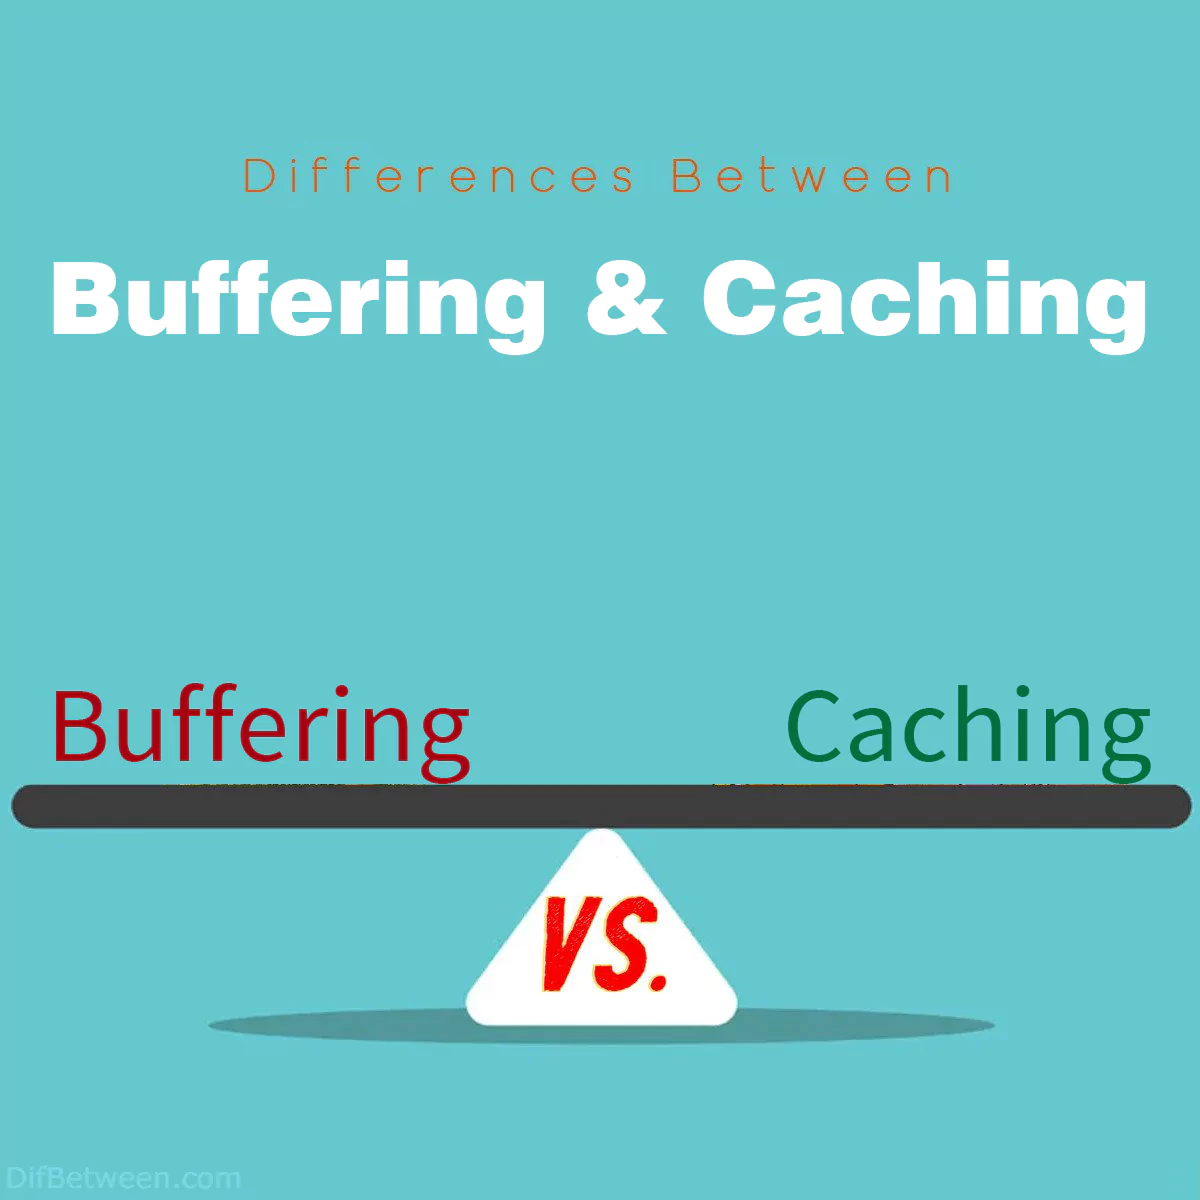 Differences Between Buffering and Caching